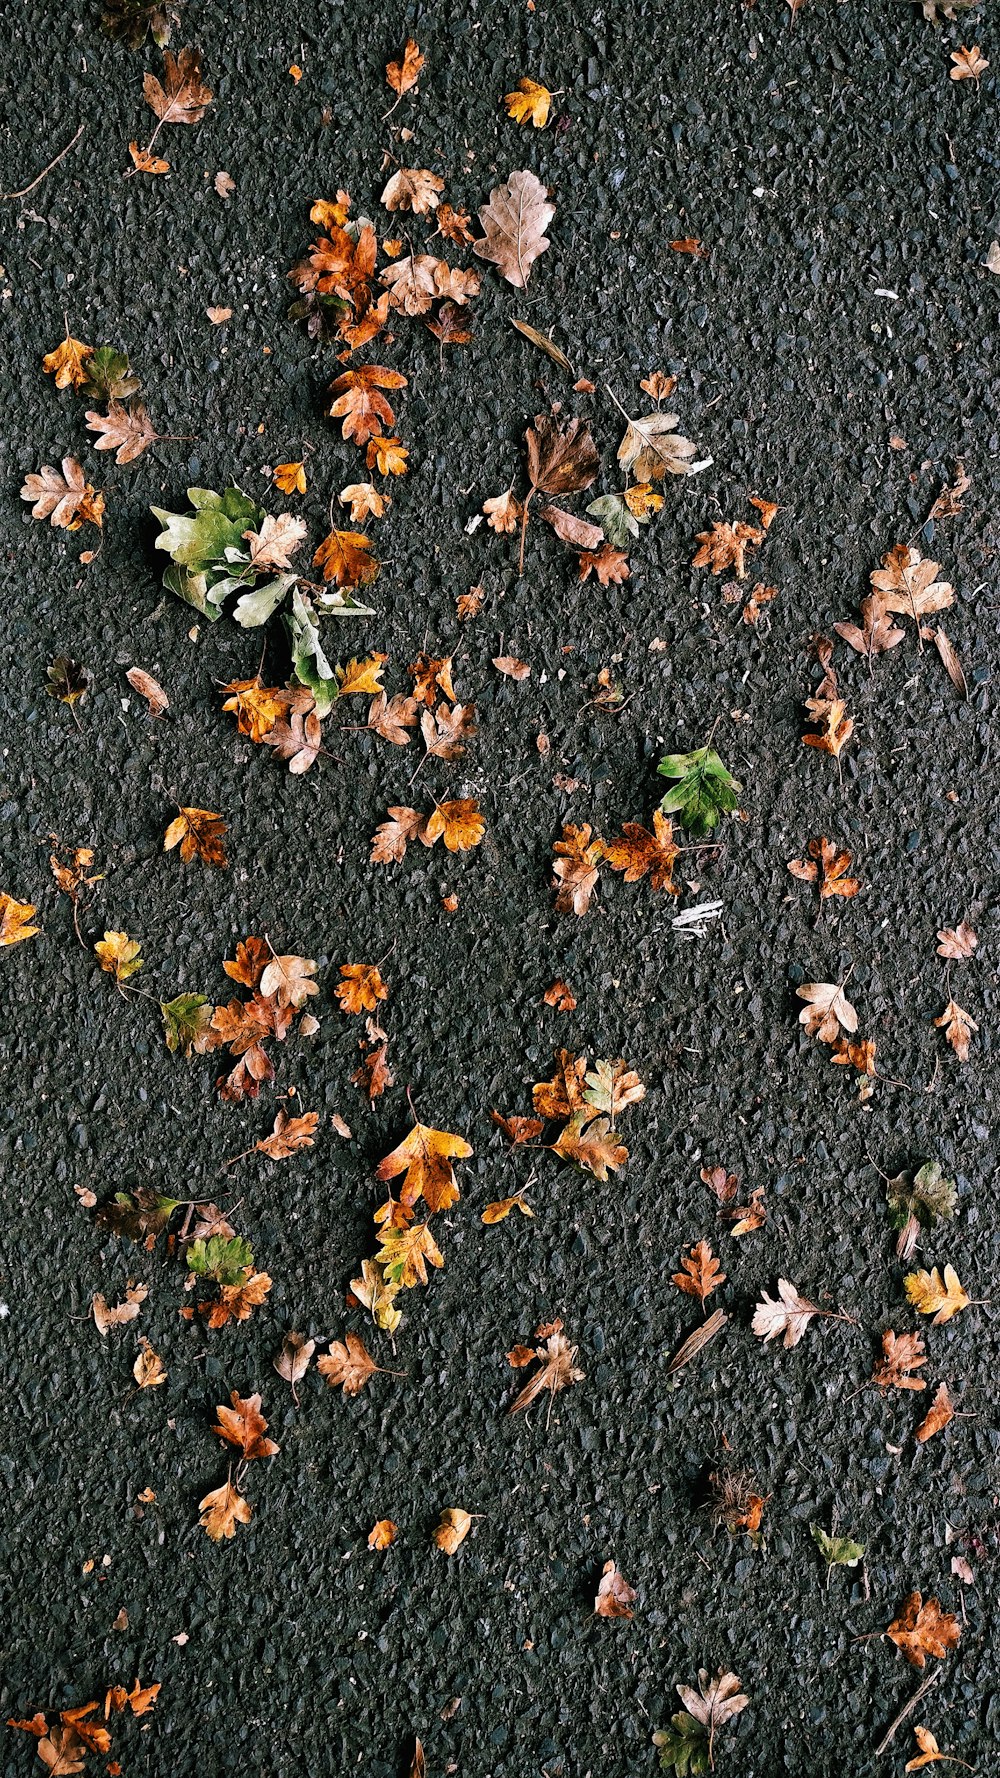 Leaves scattered on the ground.